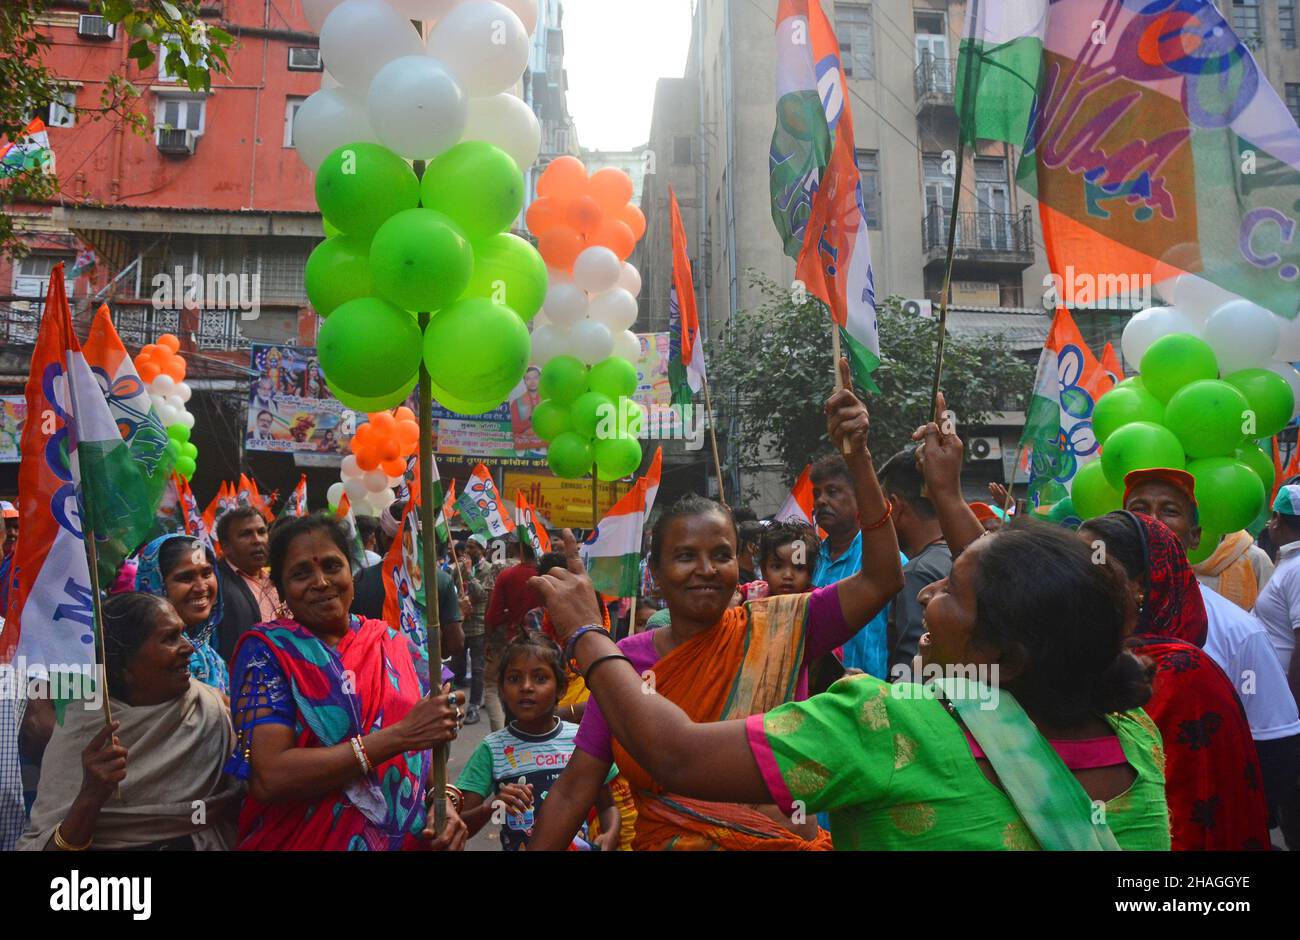 Kolkata, West Bengal, India. 12th Dec, 2021. TMC candidate Shakti Pratap Singh started his last Sunday election campaign. TMC candidate Shakti Pratap Singh was very confident about his victory and showed victory signs. To support TMC candidate Shakti Pratap Singh, Sudip Bandyopadhyay is an Indian politician and a Member of Parliament, joined this jeep rally.Kolkata Municipal Corporation (KMC) Ward No. In 45, Trinamool has expressed confidence in its younger candidate and Trinamool Youth Congress General Secretary Shakti Pratap Singh. Shakti Pratap is the younger face of Trinamool Yuva. H Stock Photo